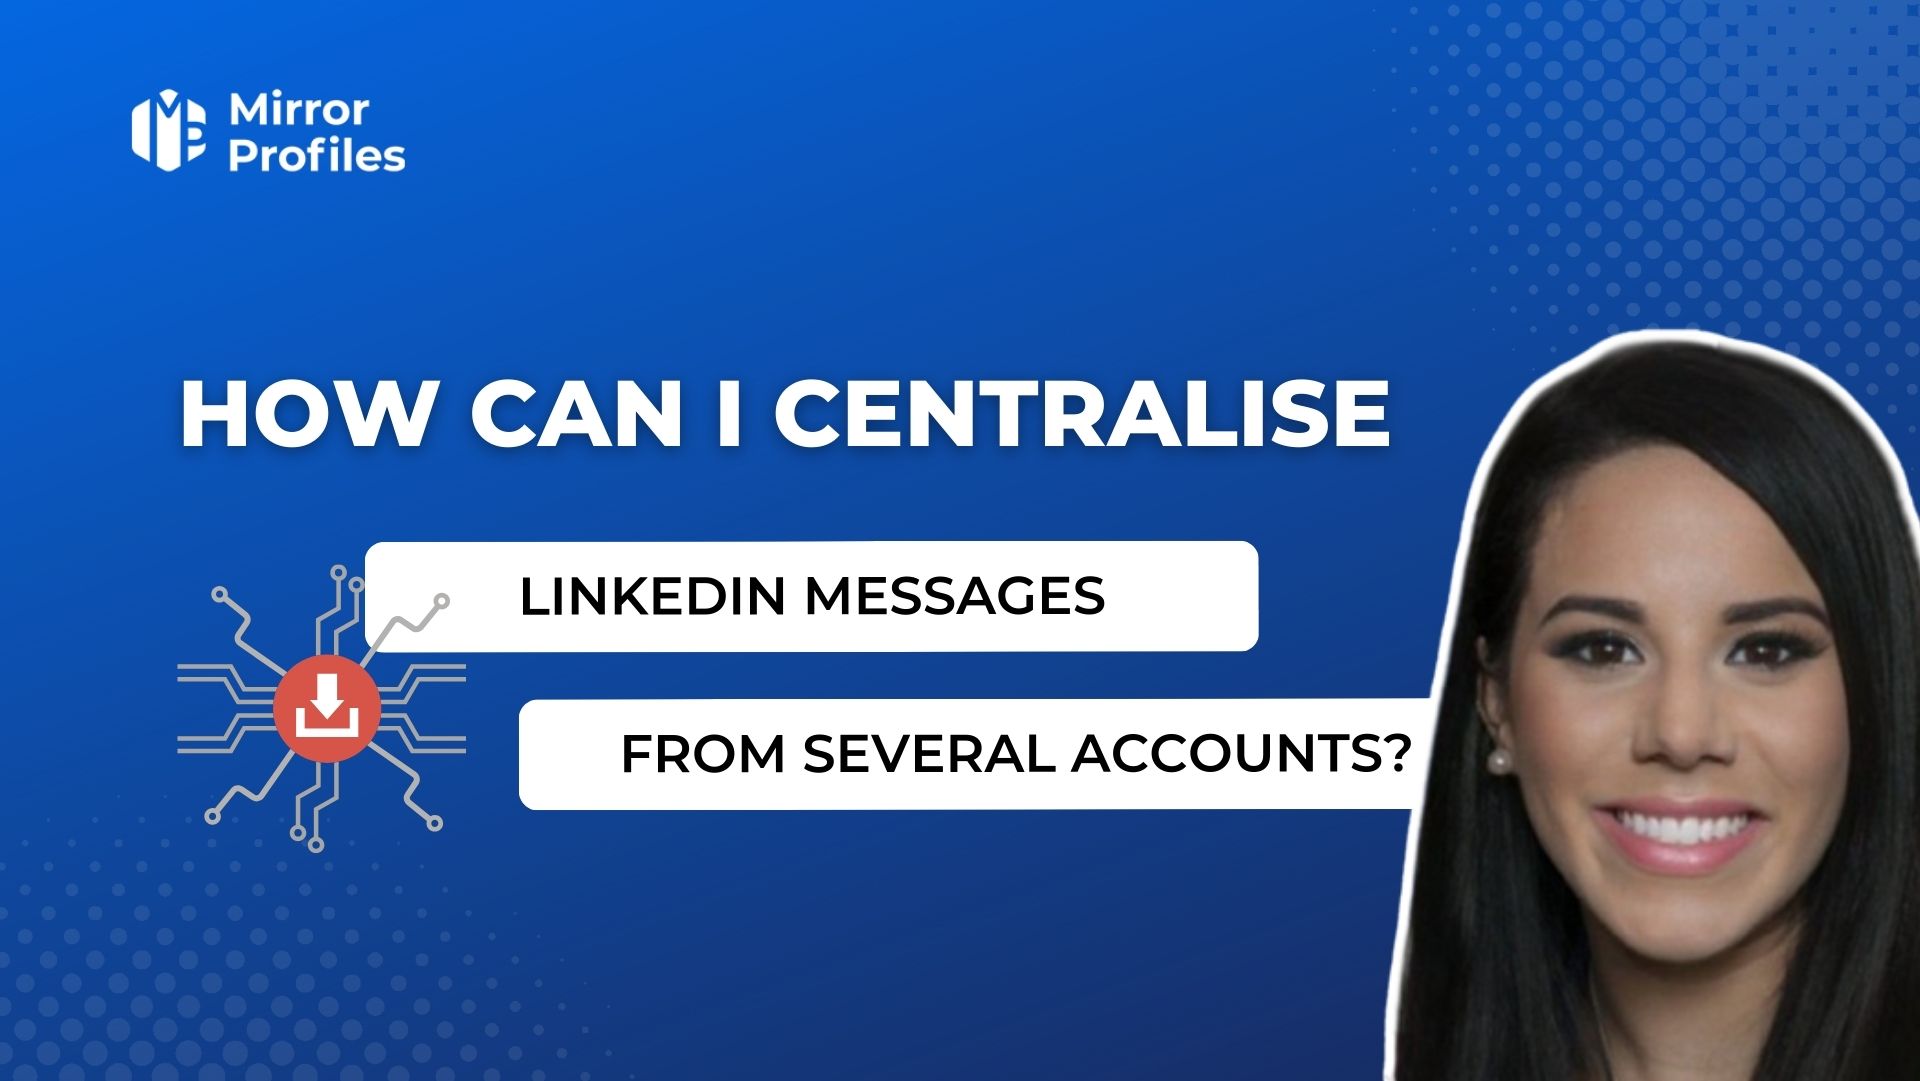 How can I centralise LinkedIn Messages from several accounts?